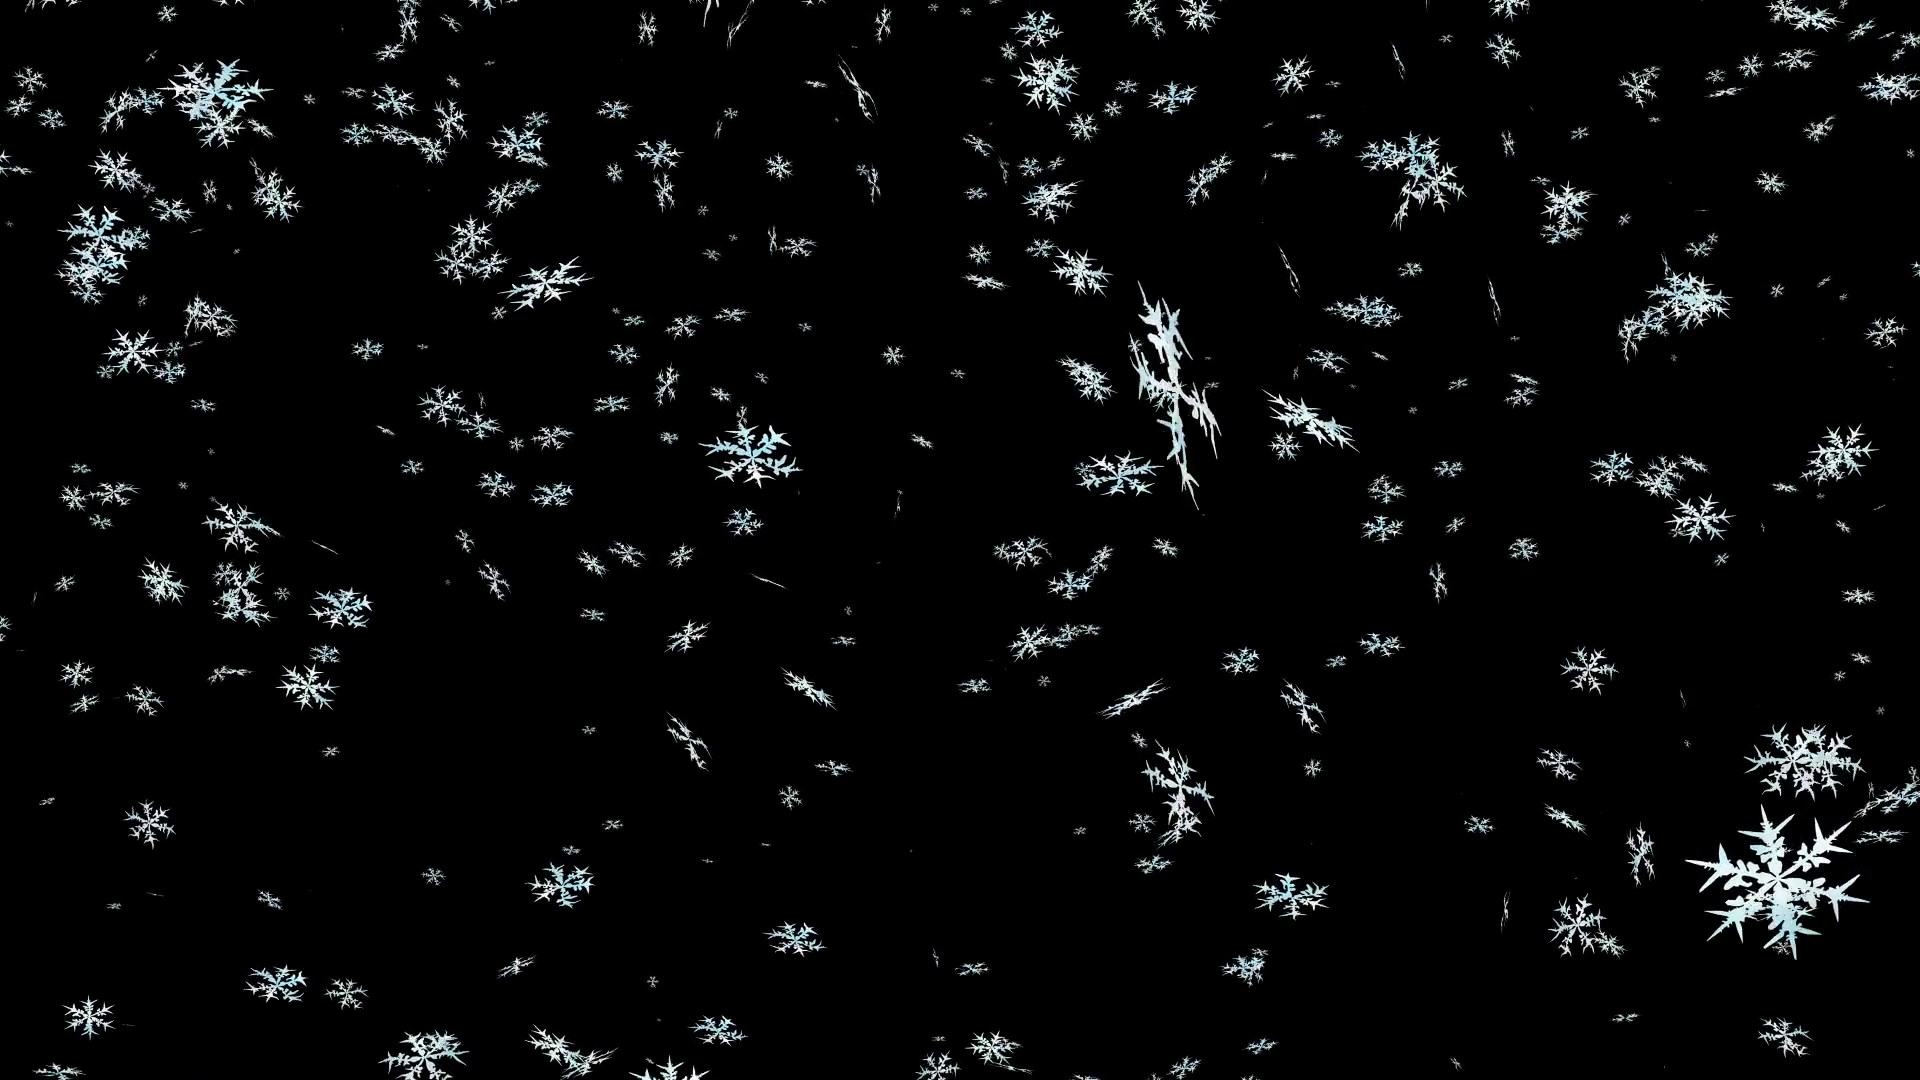 Animated Detailed Snow Flakes On Transpa #1630.